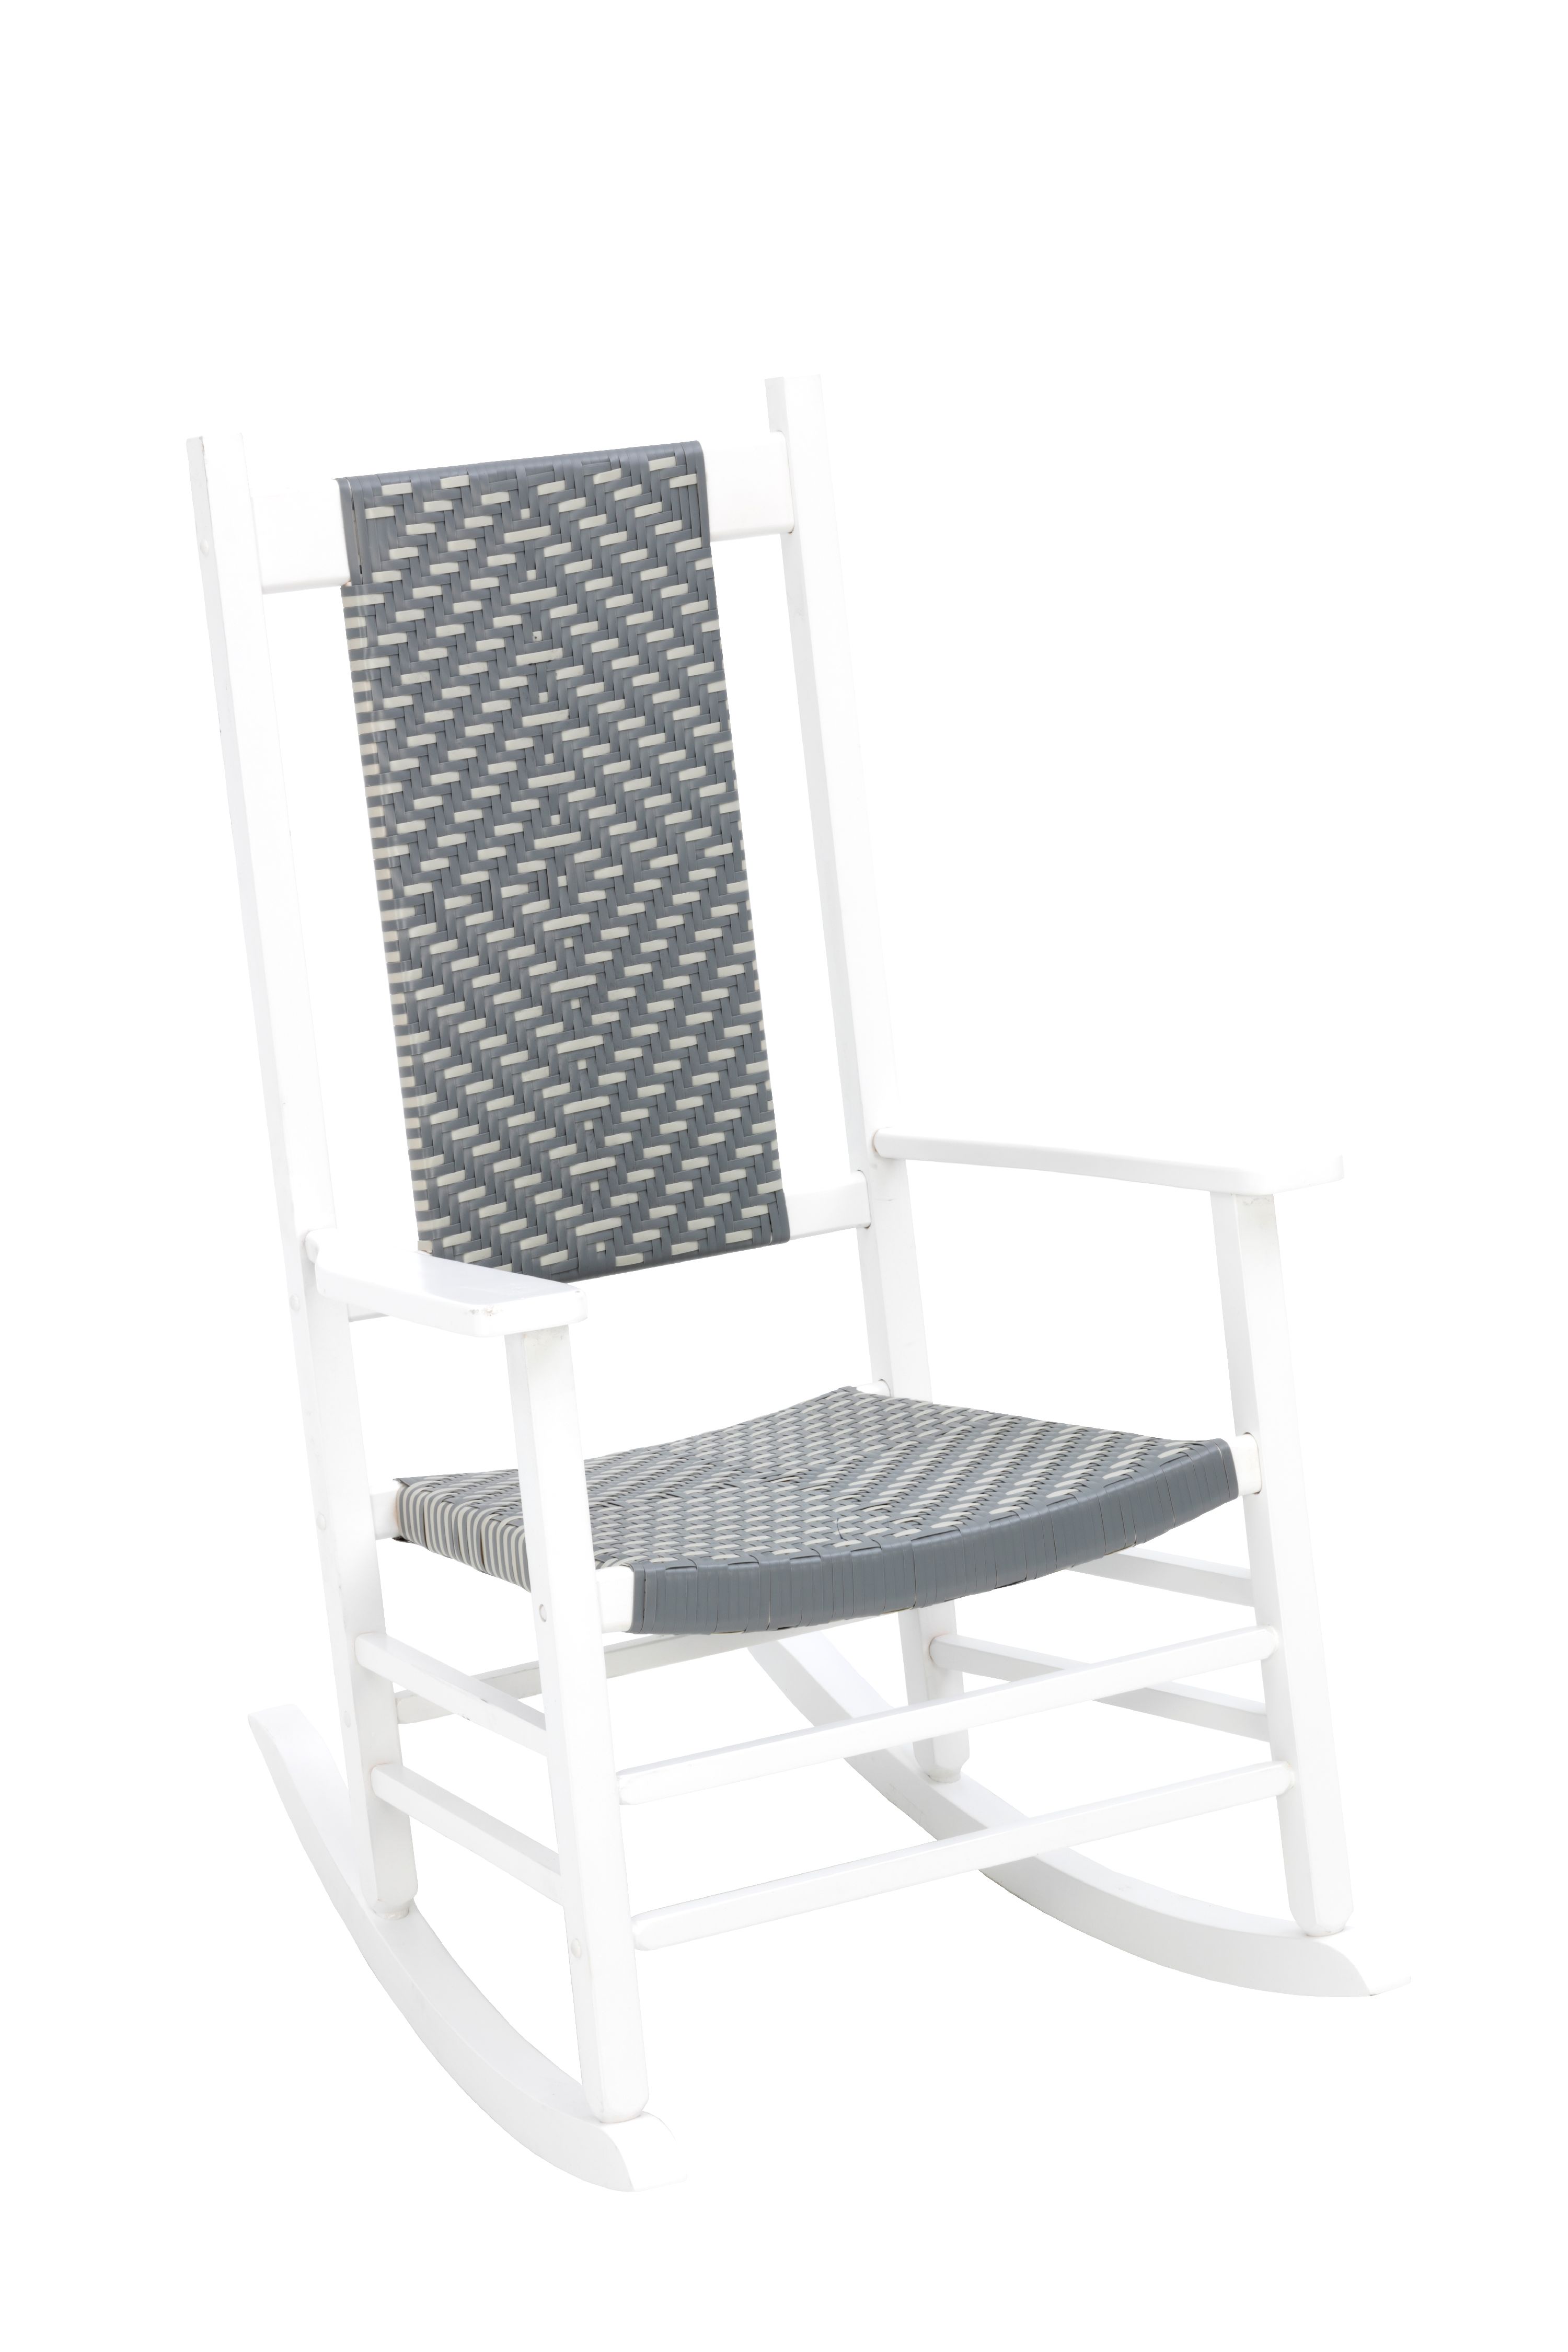 Jack Post Knollwood Rocker With Wicker In White & Gray - image 2 of 3